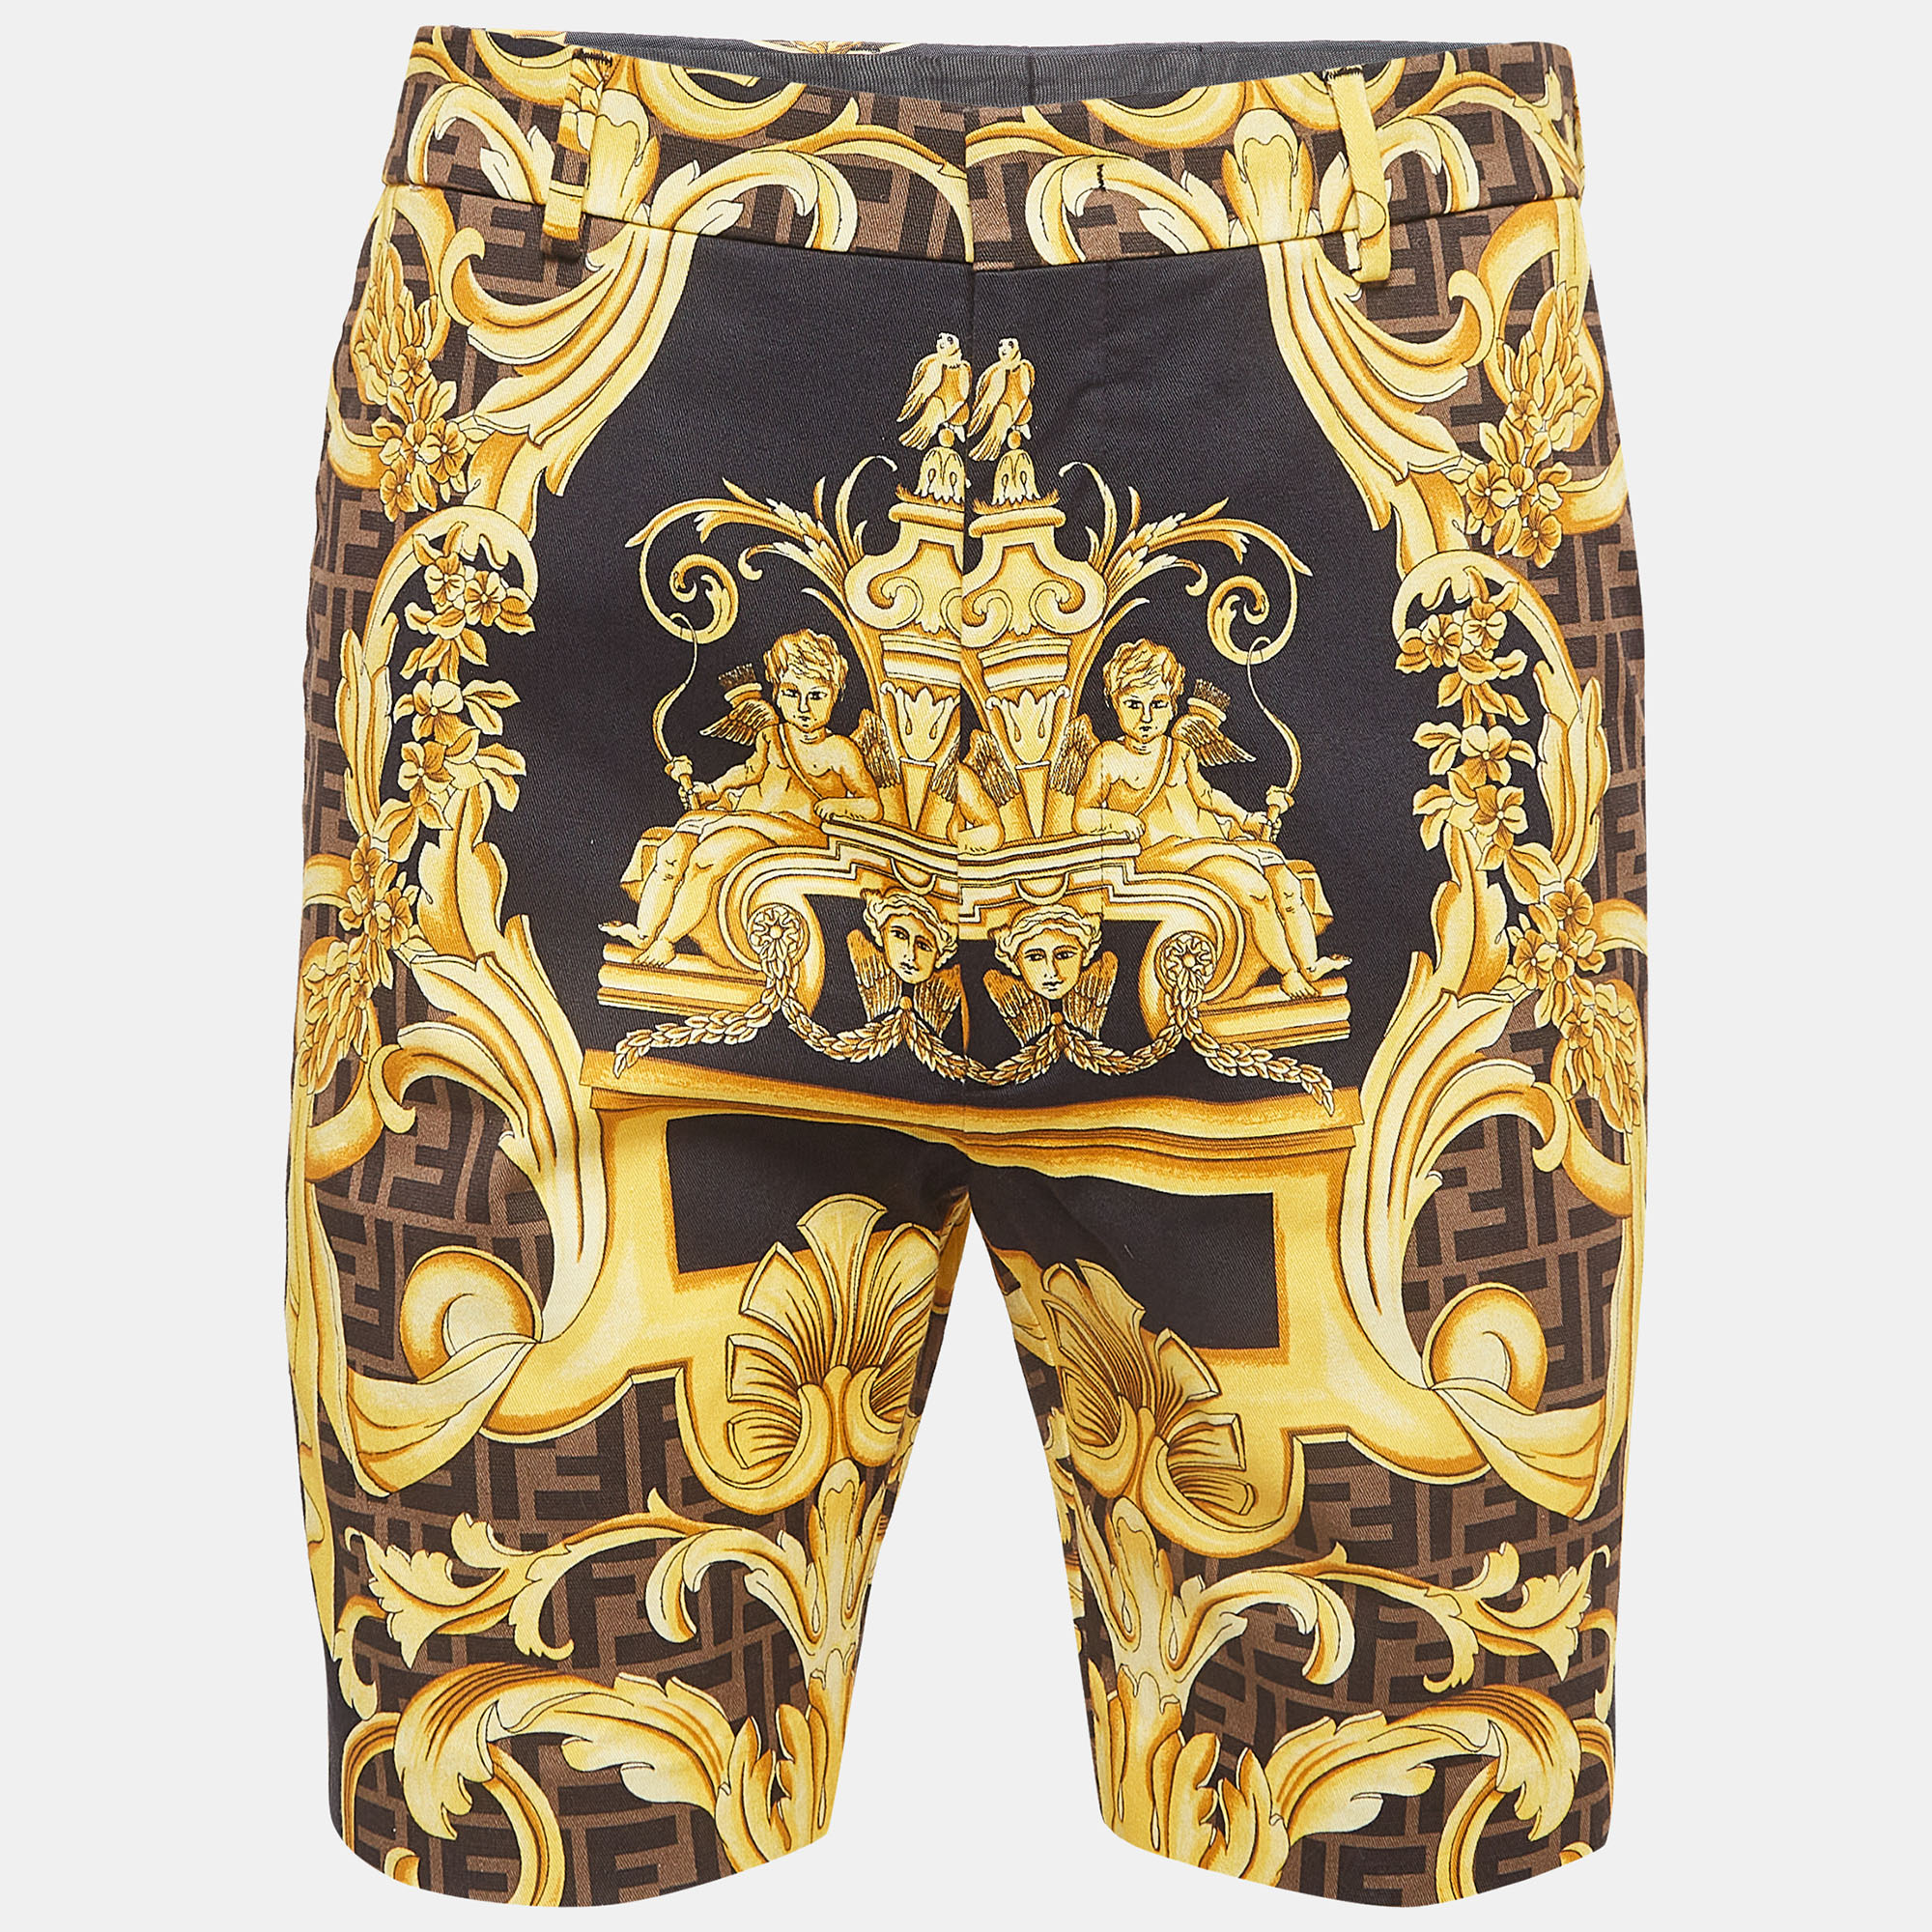 Crafted in luxurious cotton the Fendi x Versace bermuda shorts fuse opulence with street style edge. The intricate baroque pattern featuring striking black and yellow hues exudes boldness. With a comfortable fit and iconic branding these shorts redefine contemporary fashion with a rebellious flair making a statement effortlessly chic.